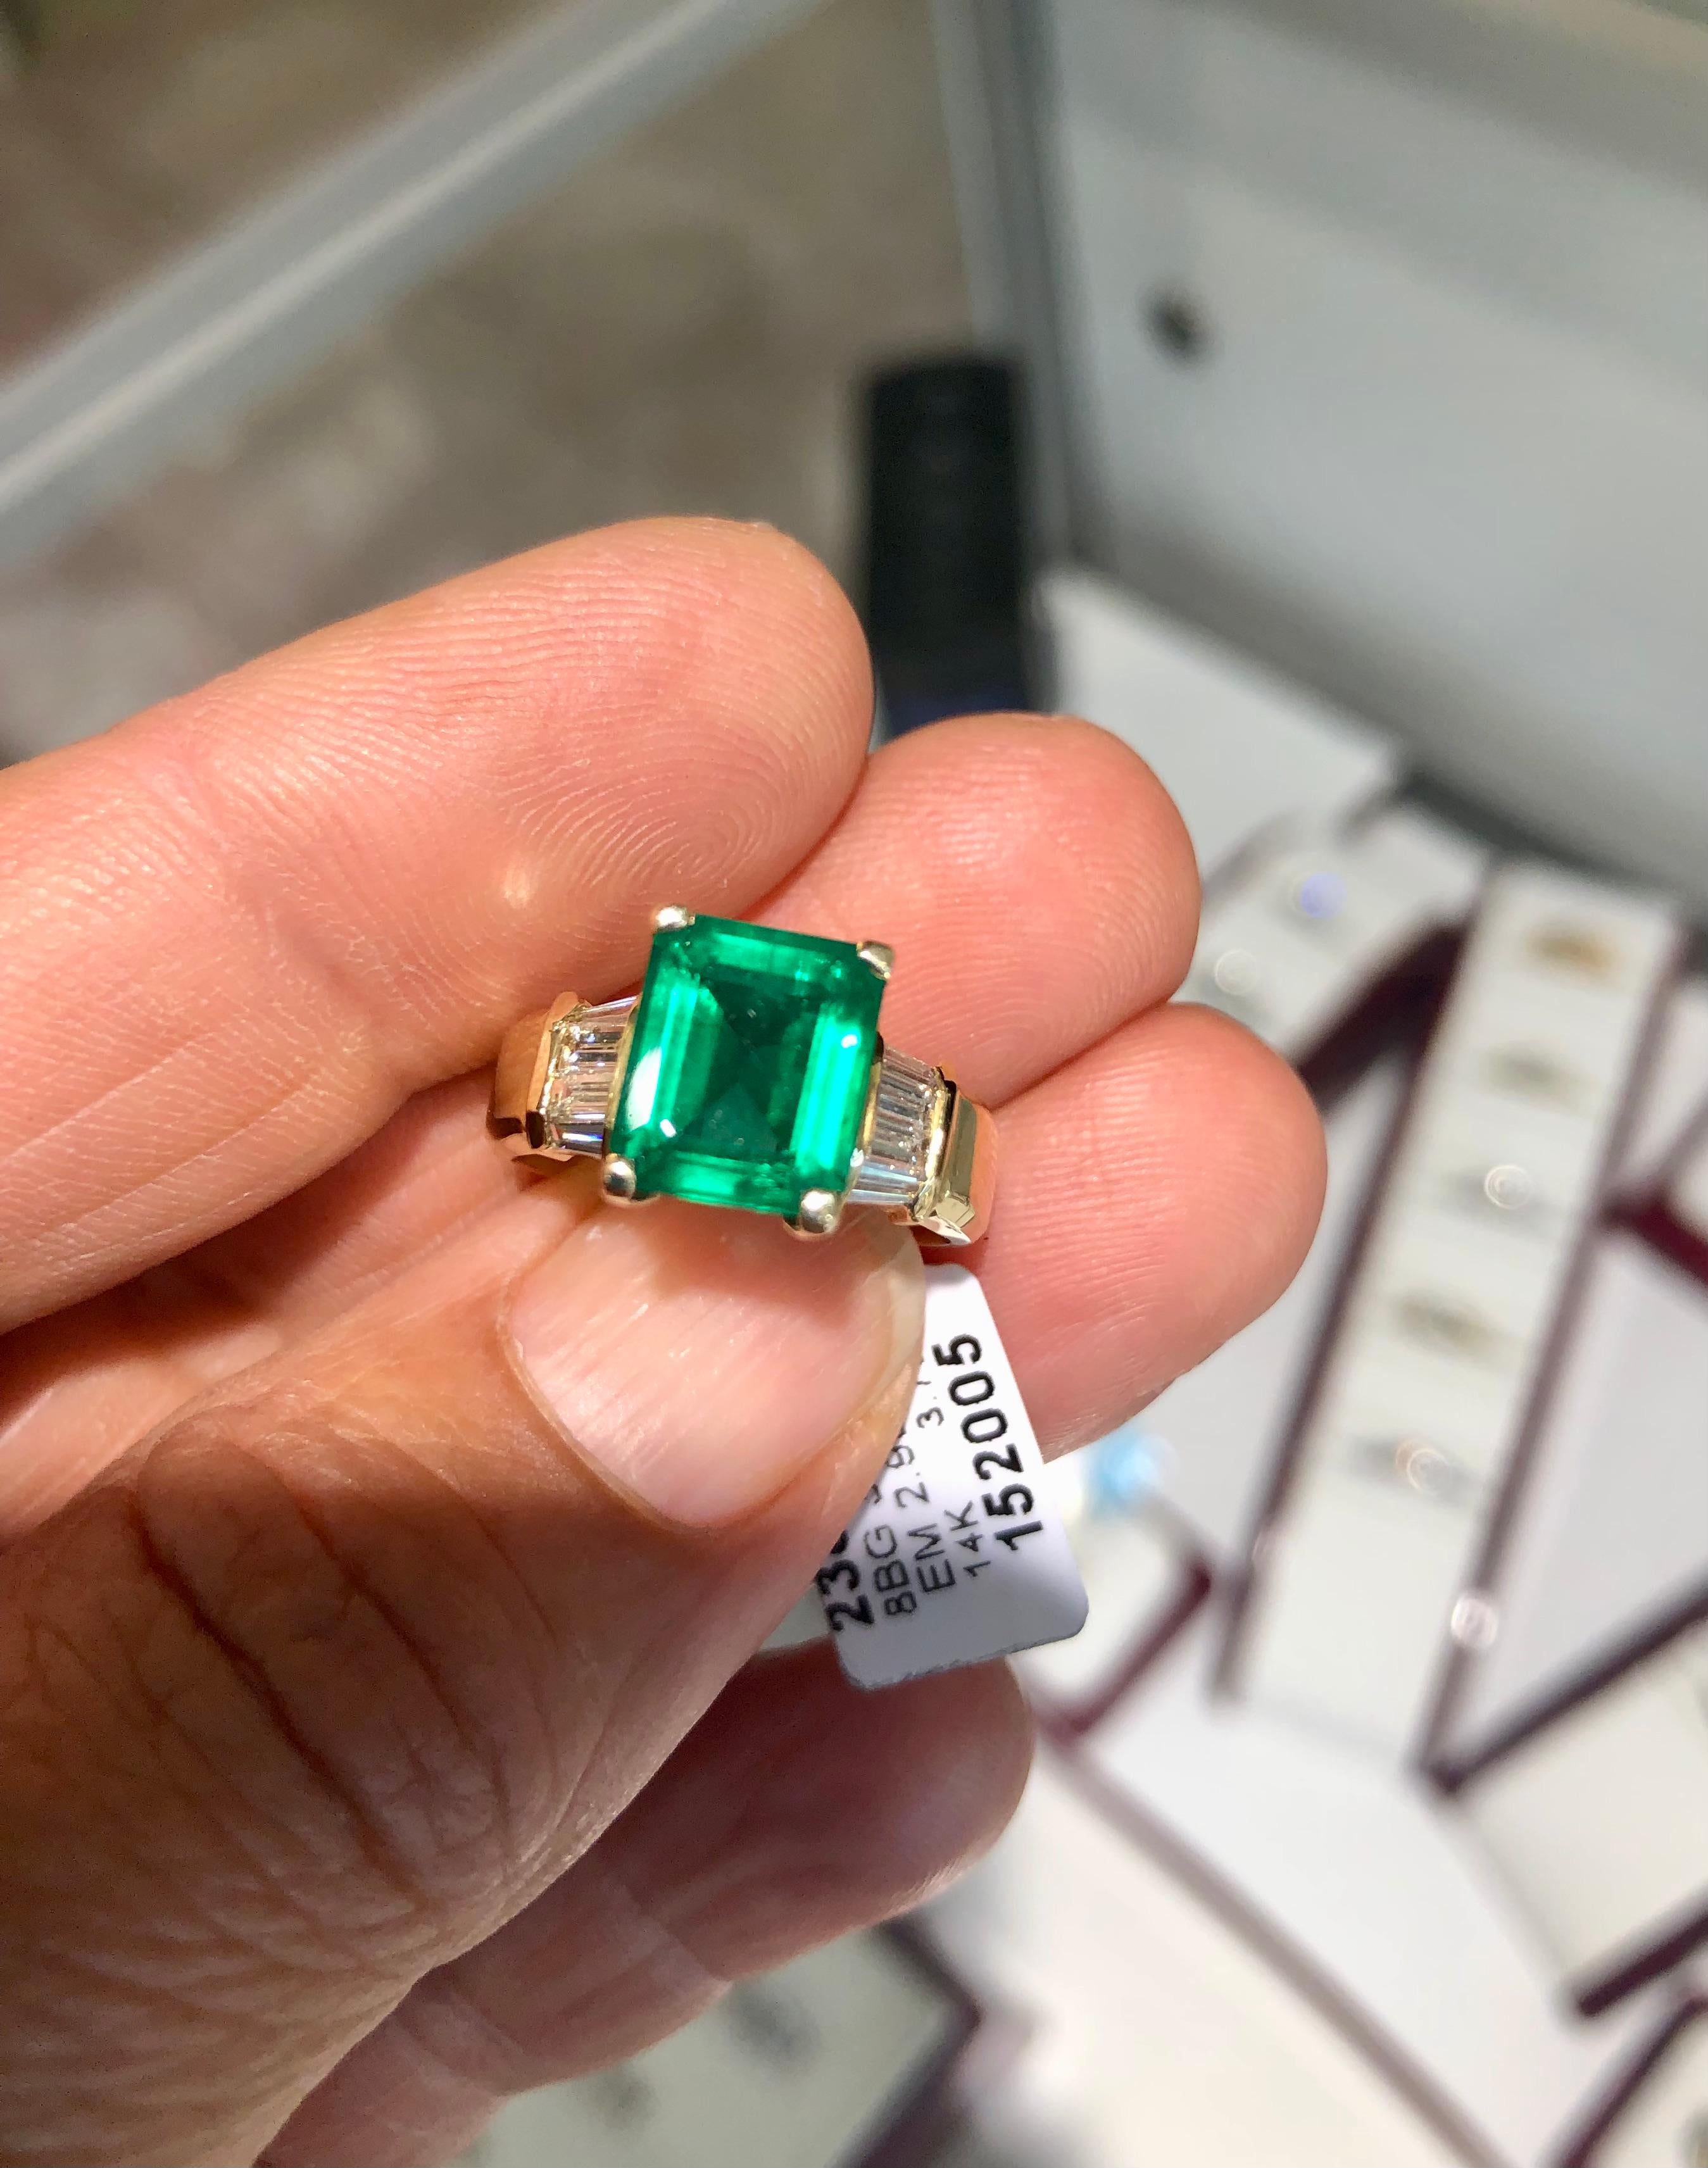  gorgeous showcasing estate ring centering an Intense perfect medium green Emerald-cut Zambian genuine emerald 2.90 Carats. The emerald is very clean. The side diamonds are baguette-cut total of 0.38ct and are color H-SI clarity.
Ring size: 6
14K